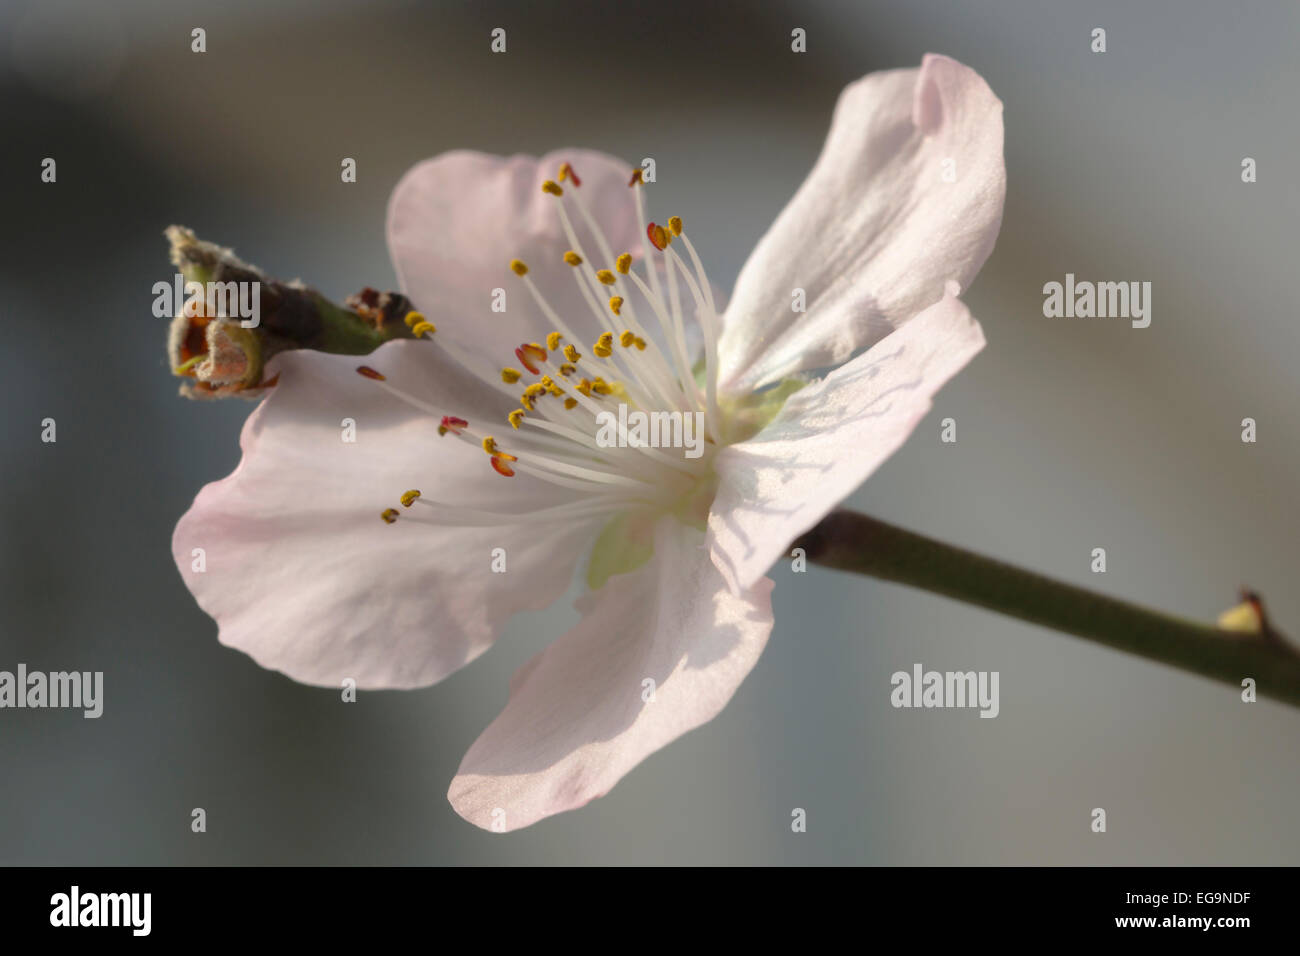 Macro of flowering peach blossoms -  Prunus persica, against a soft pastel gray background. Stock Photo